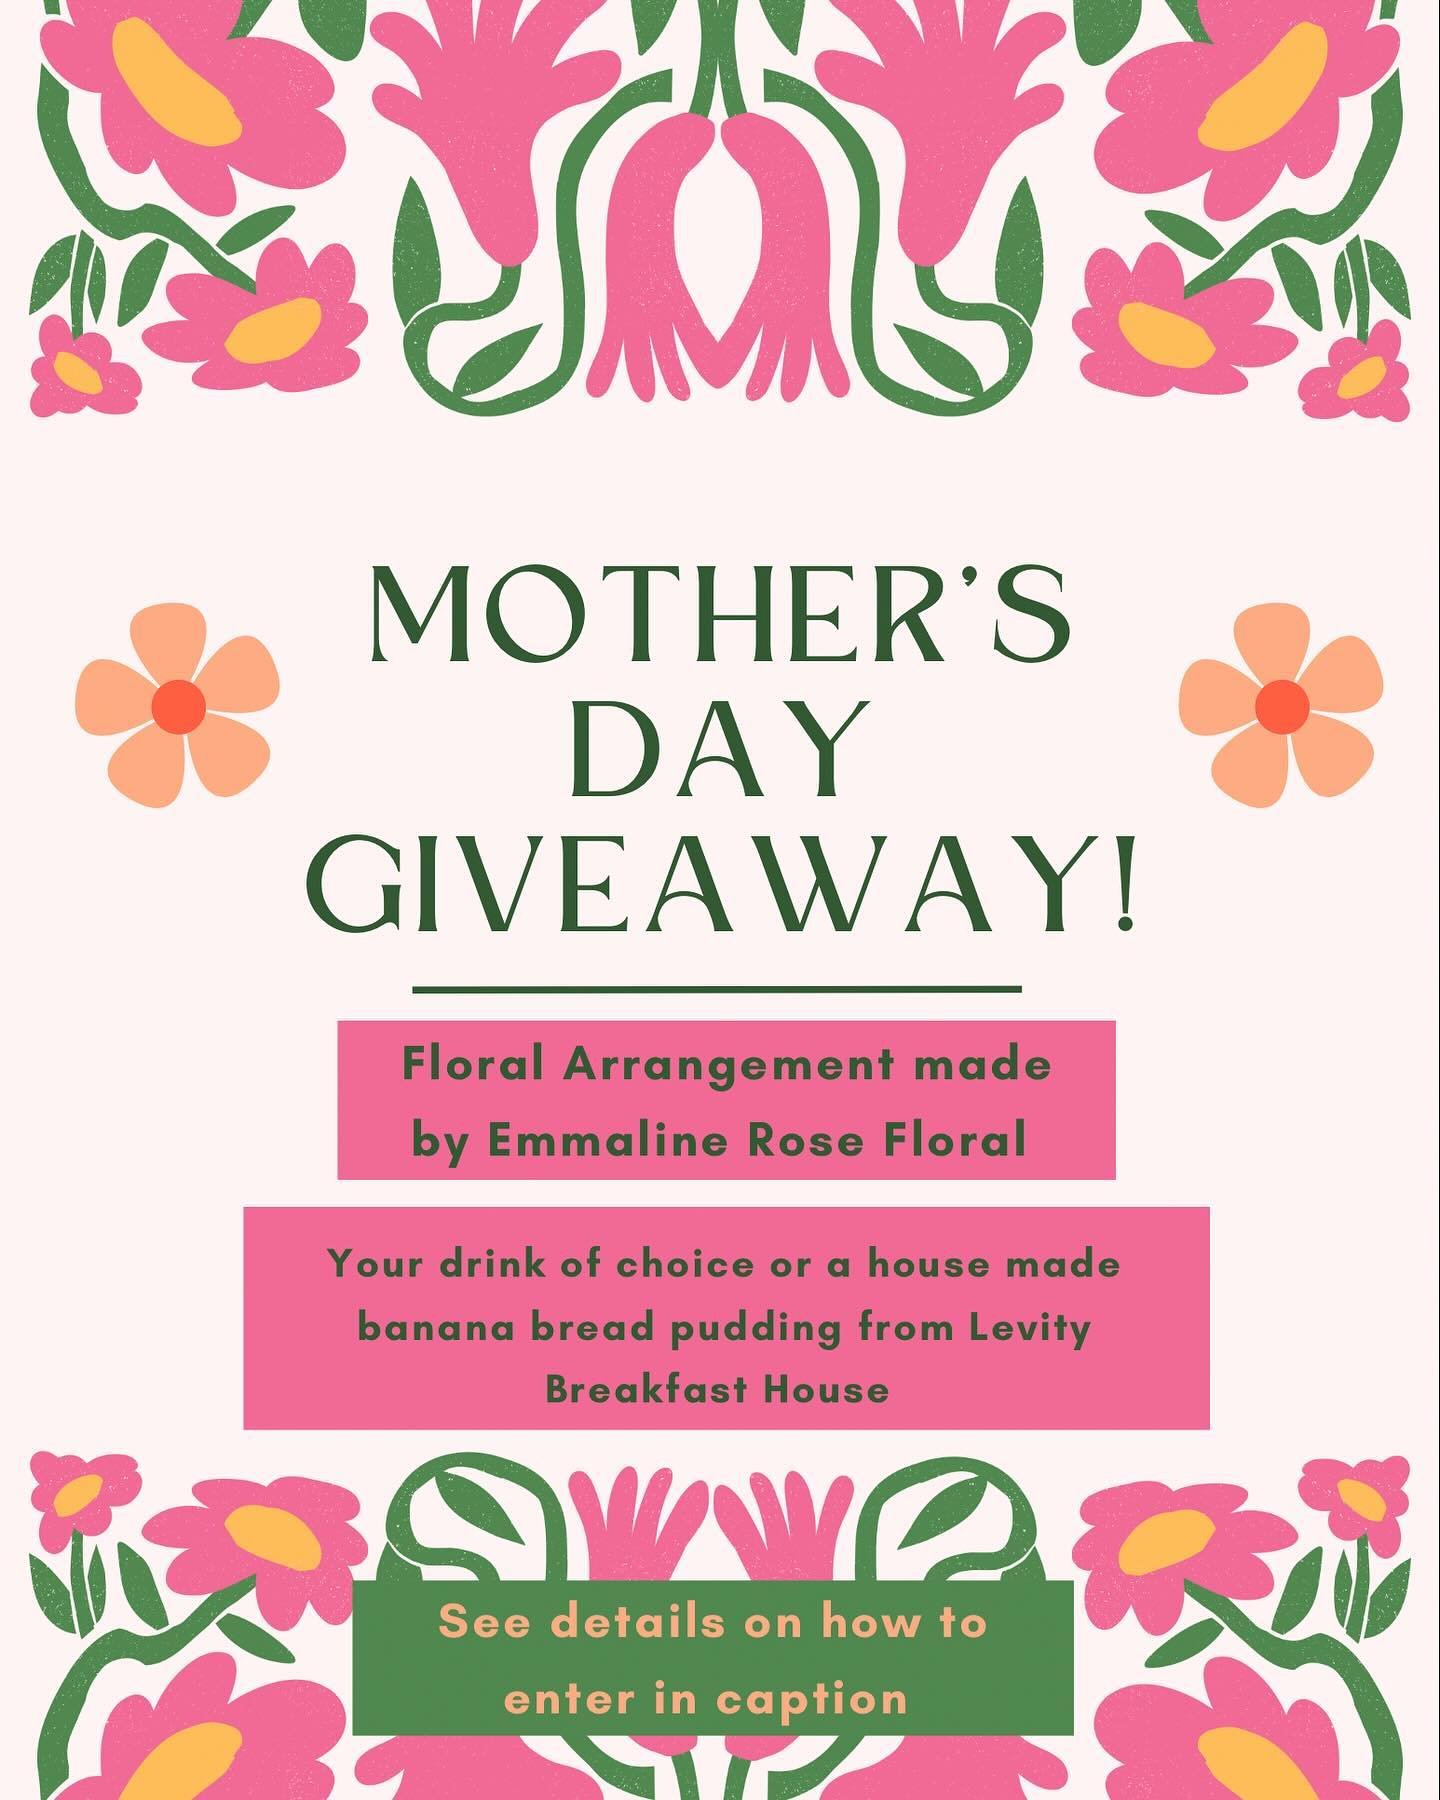 🌸✨GIVEAWAY TIME! ✨🌸 I can&rsquo;t believe it&rsquo;s been several years since I last did a giveaway!? I figured what better time to have one than Mother&rsquo;s Day! Enter to win a bouquet + treat for your momma, a special person in your life, or a